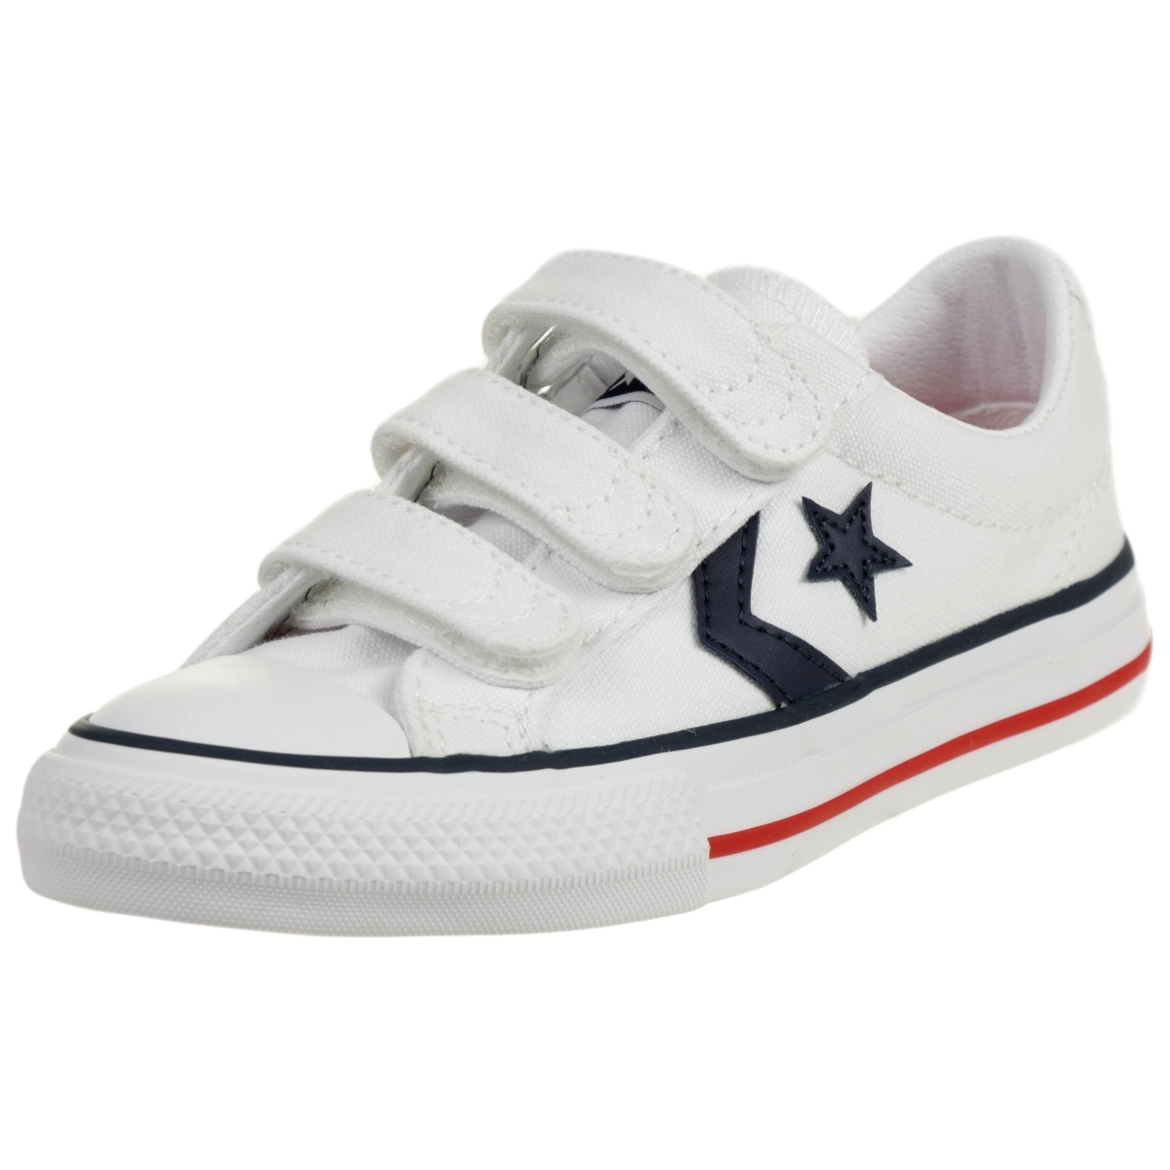 Converse CTAS 3V OX Easy-On Star Player Low Top Kinder Sneaker 315660 Weiß